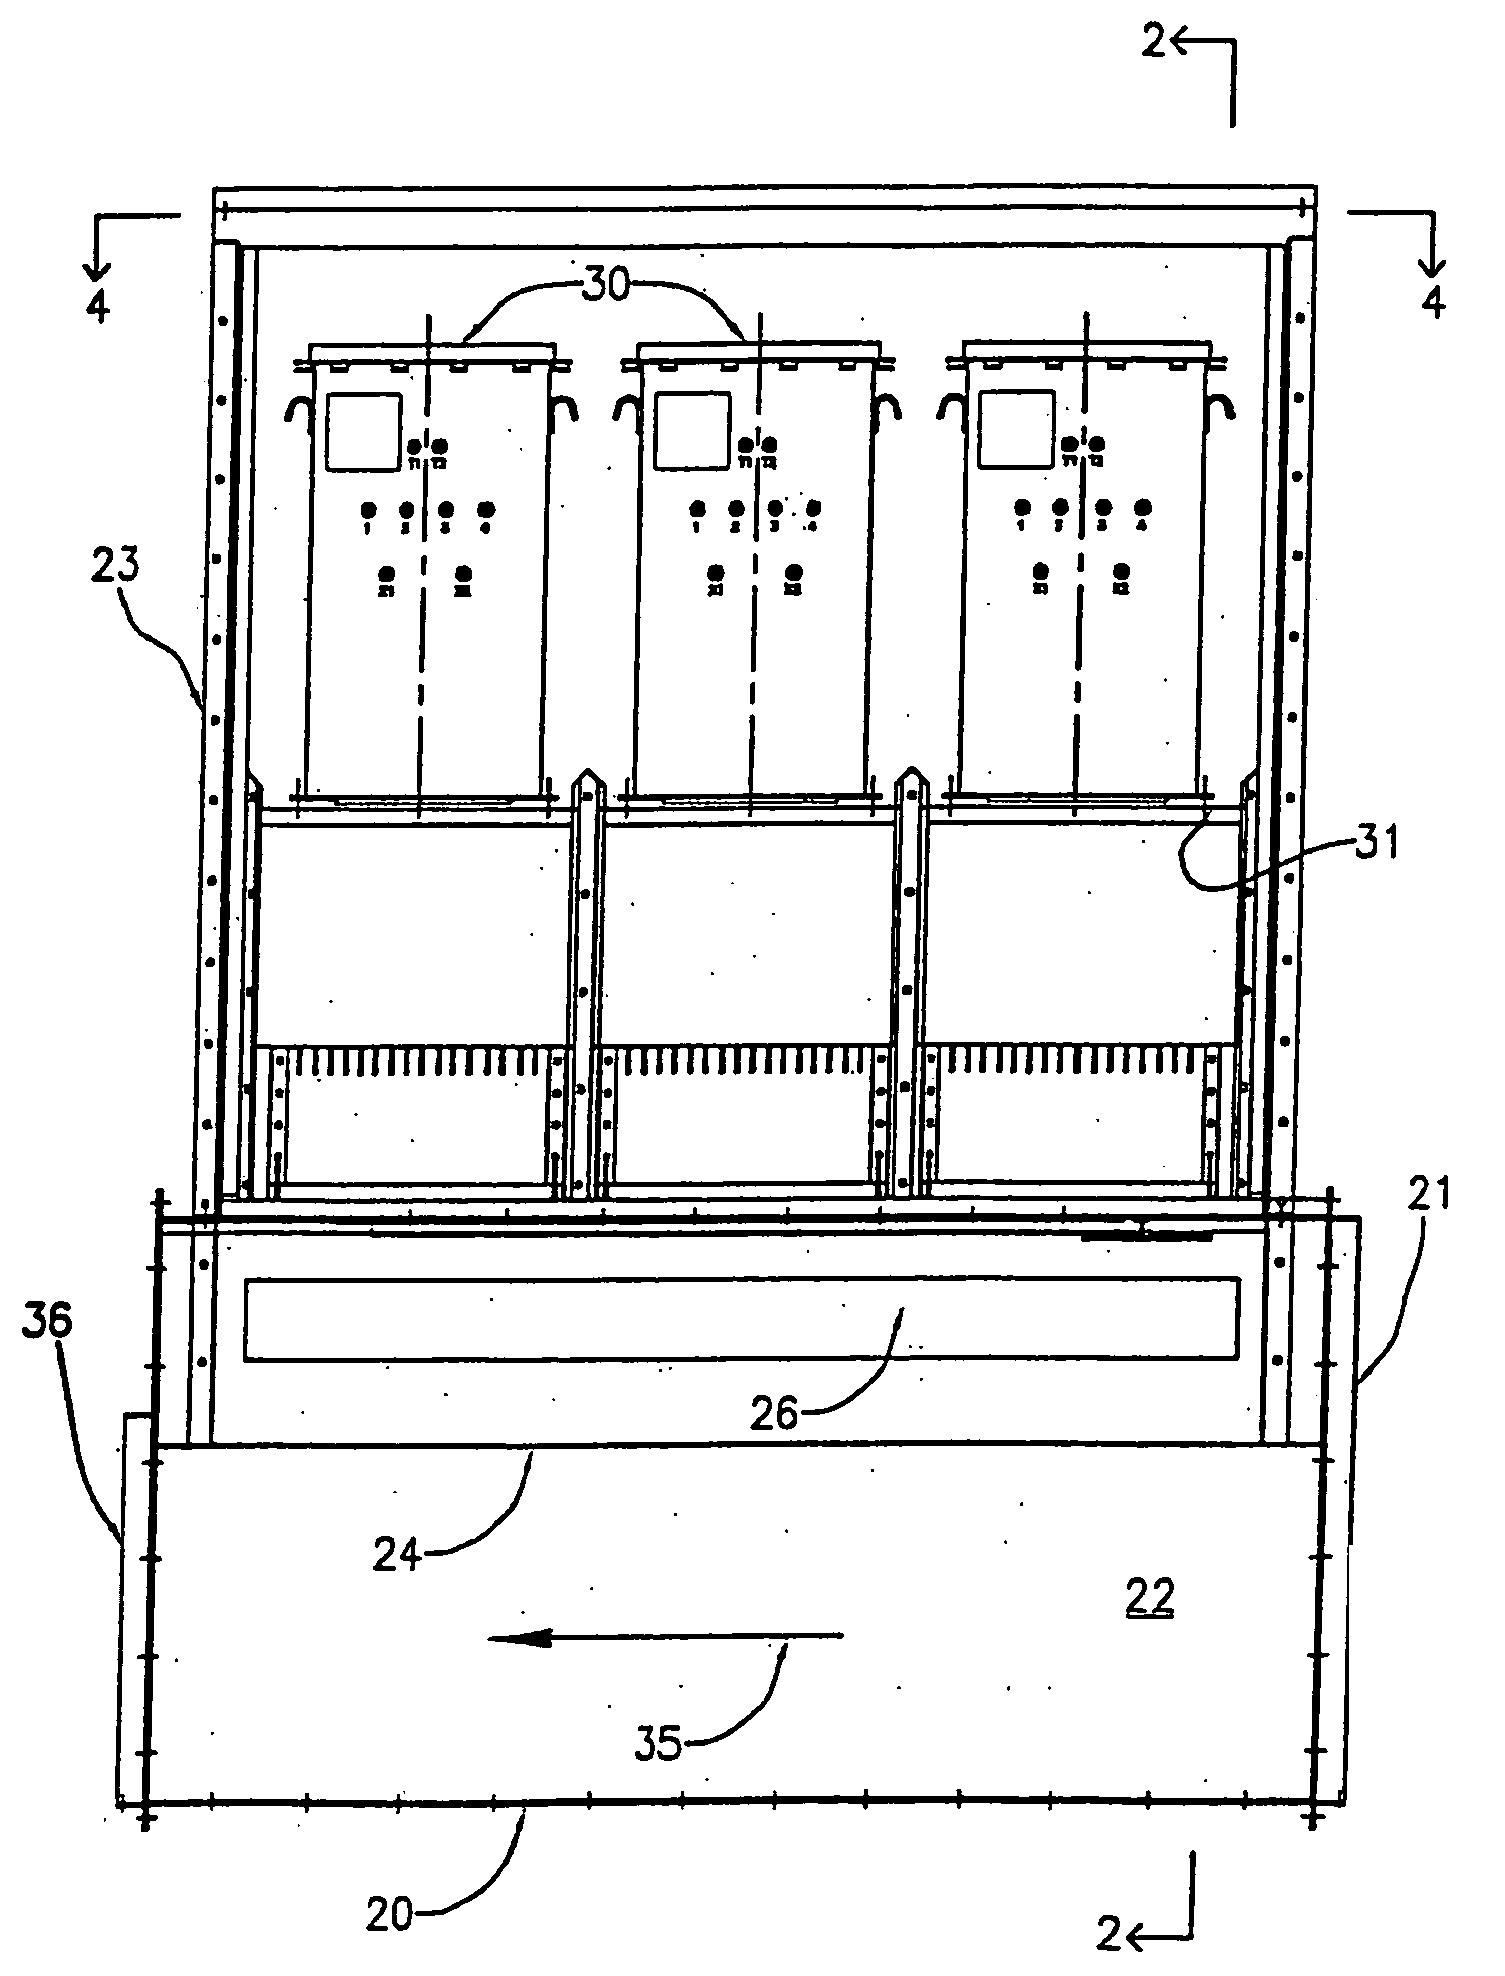 Dielectric barrier discharge cell with hermetically sealed electrodes, apparatus and method for the treatment of odor and volatile organic compound contaminants in air emissions, and for purifying gases and sterilizing surfaces